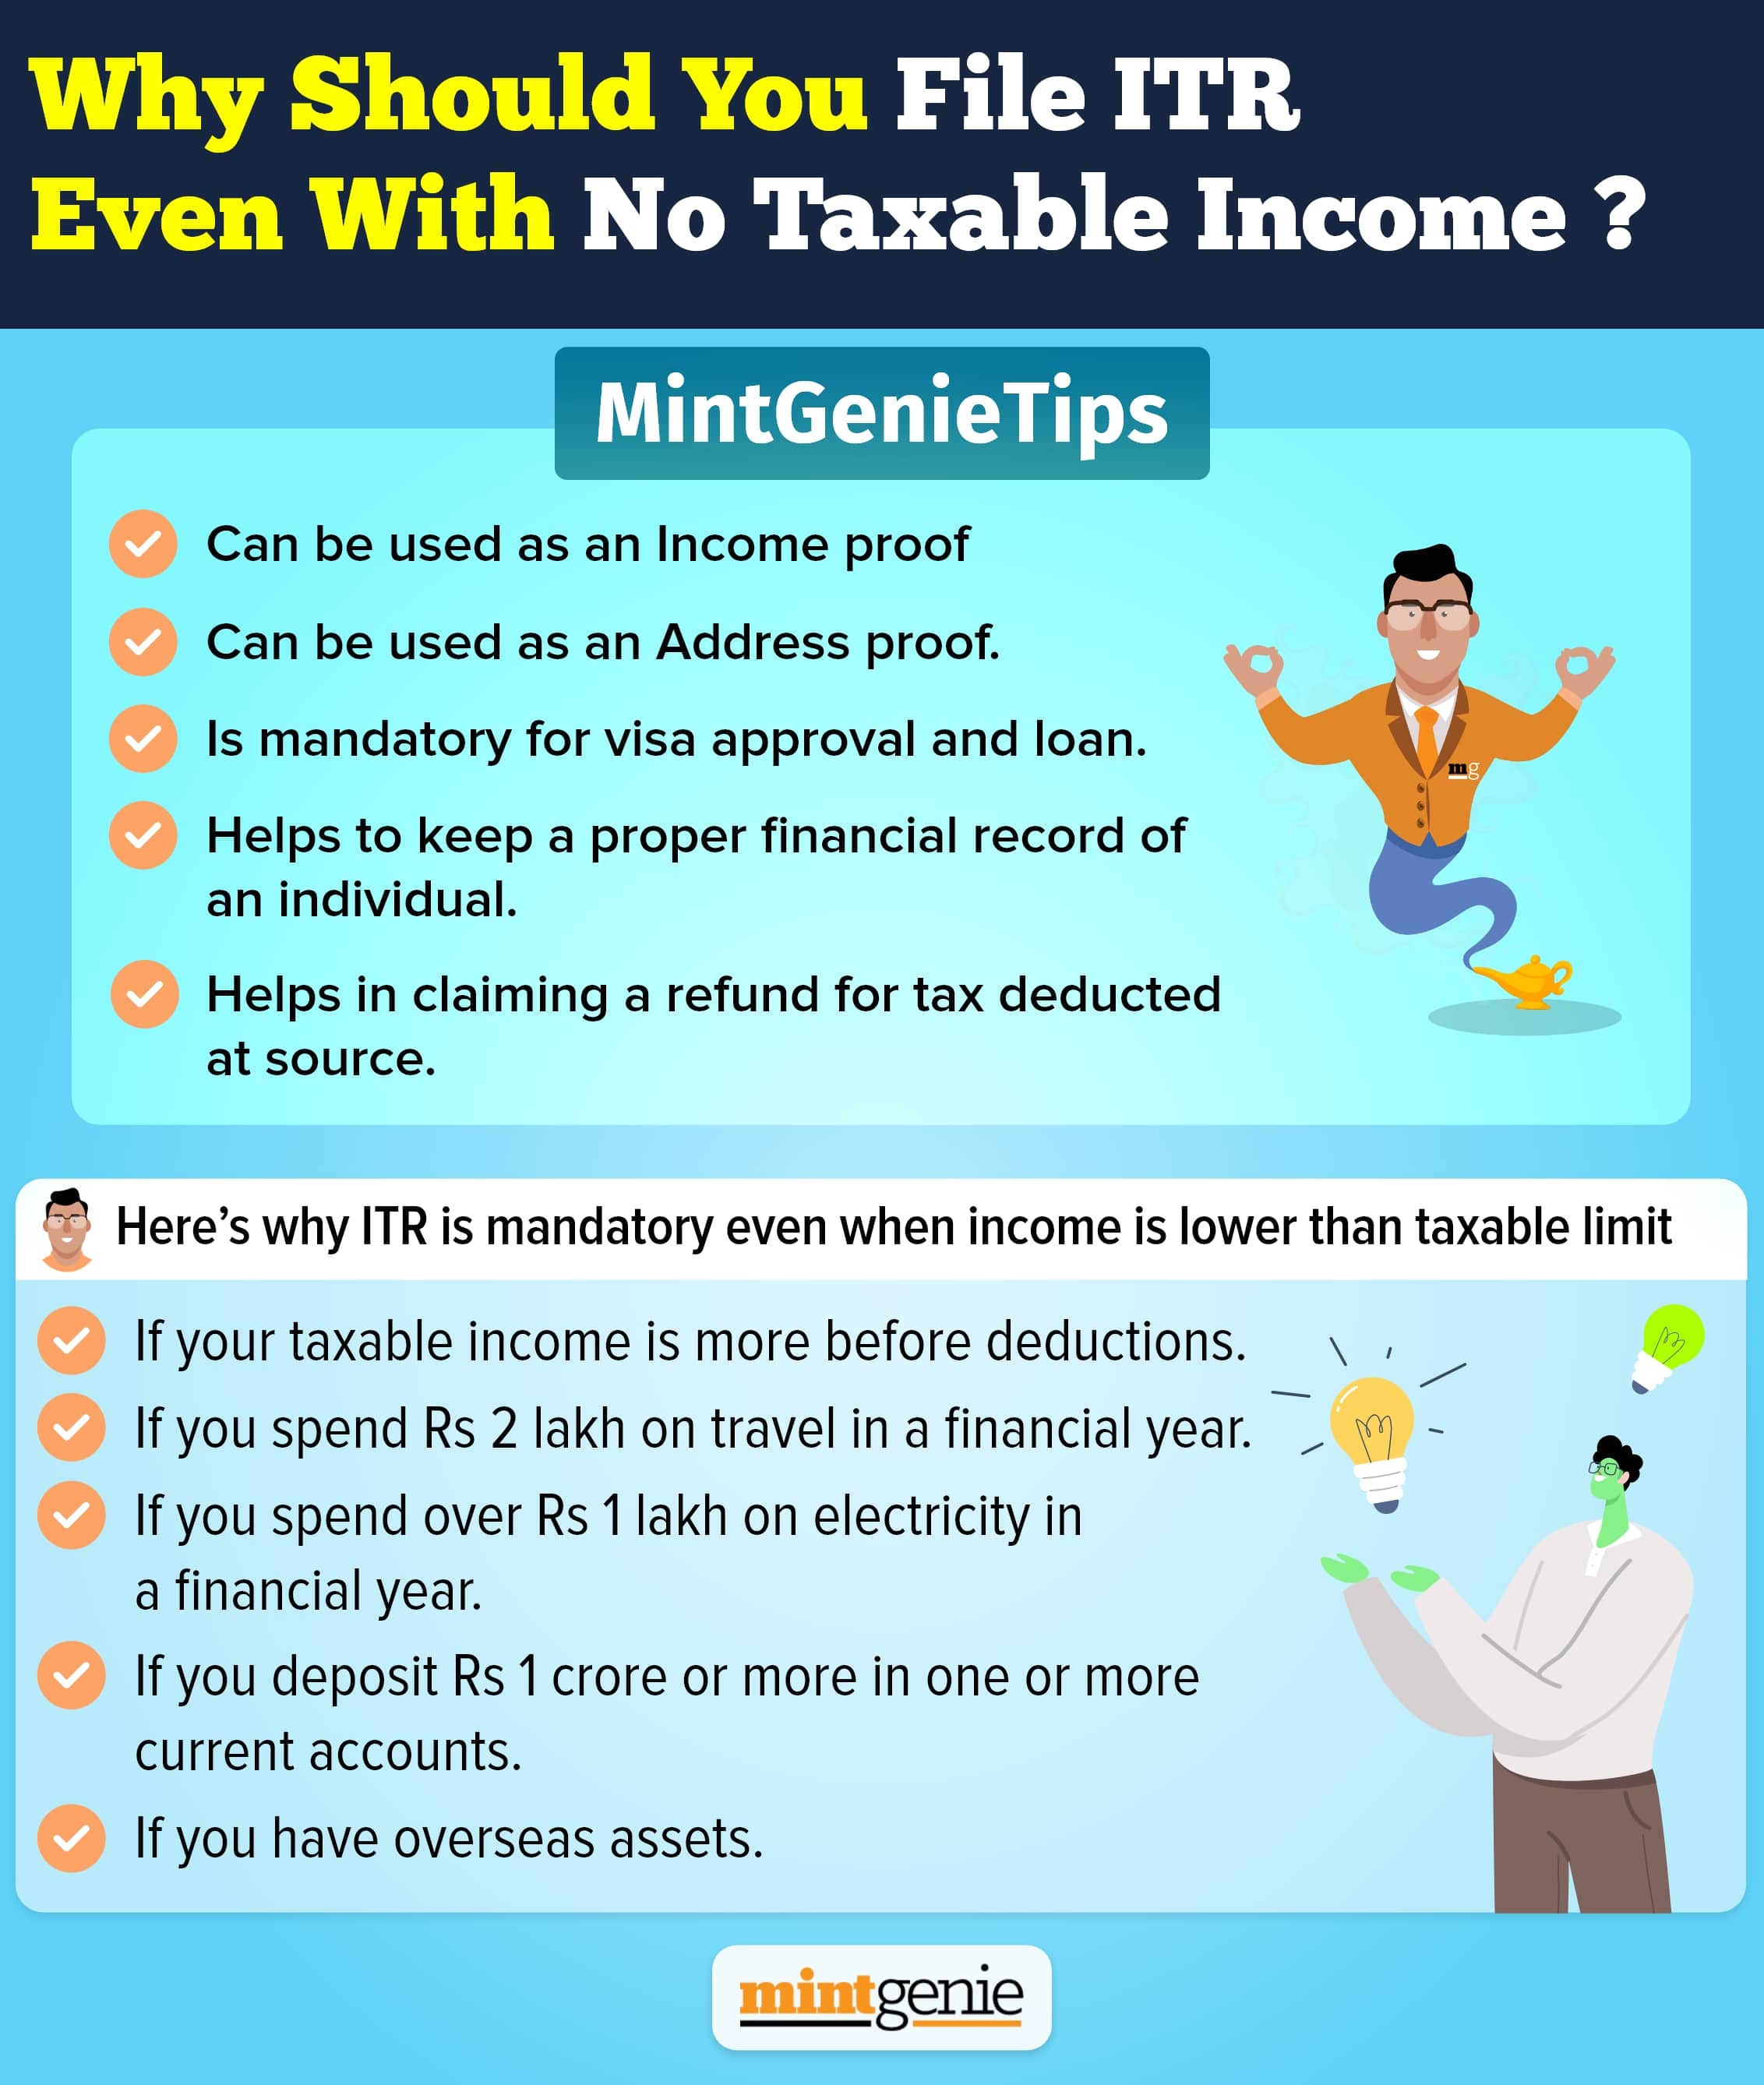 Why should you file ITR even with no taxable income: